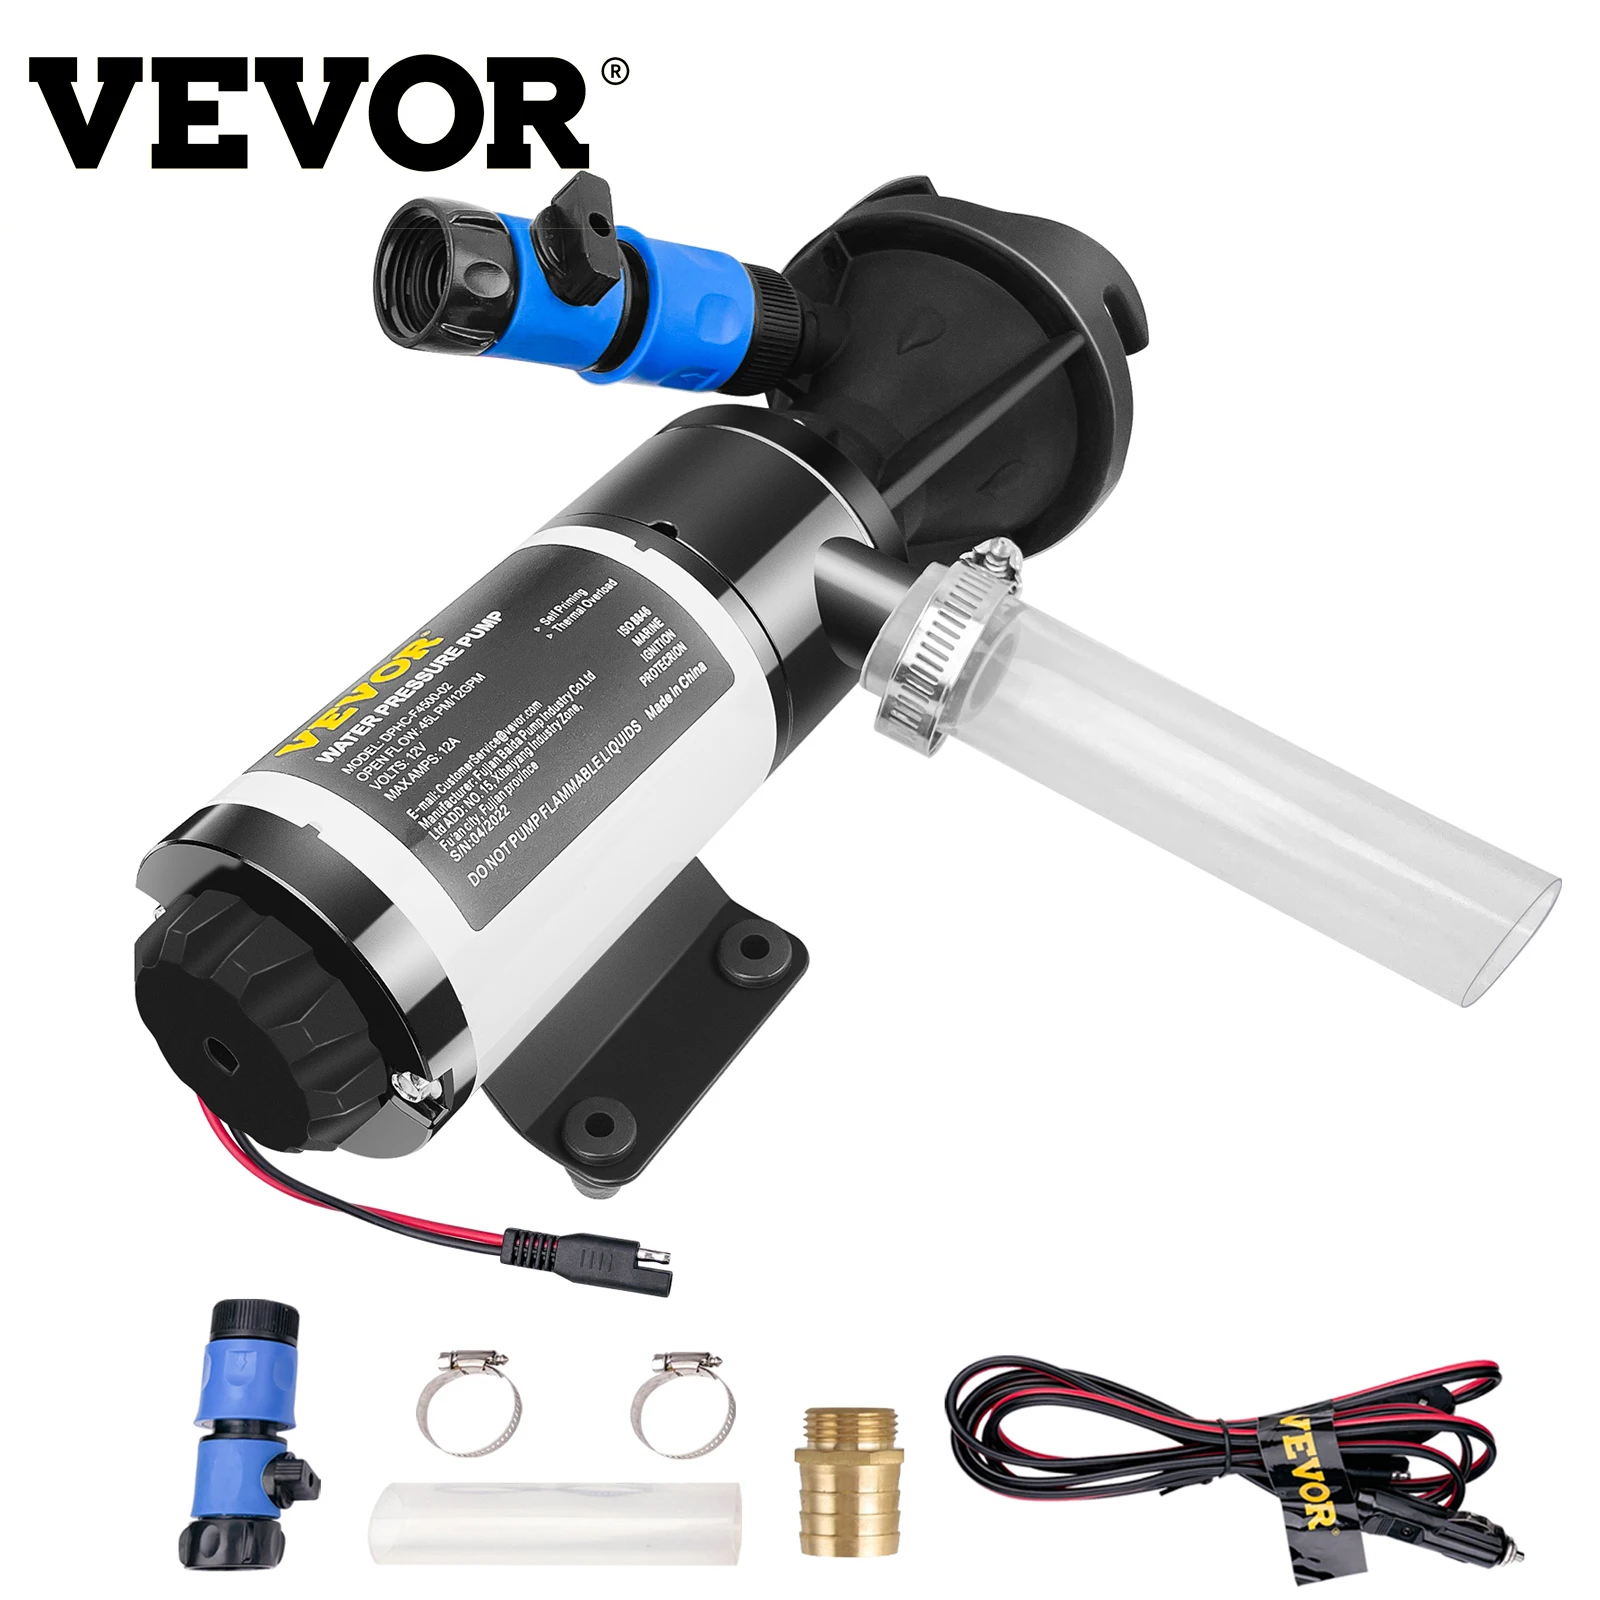 VEVOR RV Macerator Pump 12V/24V 12 GPM Self-priming Water Waste Pumps w/RV Connector & Hose 16 ft Lifting Height for RV Yacht